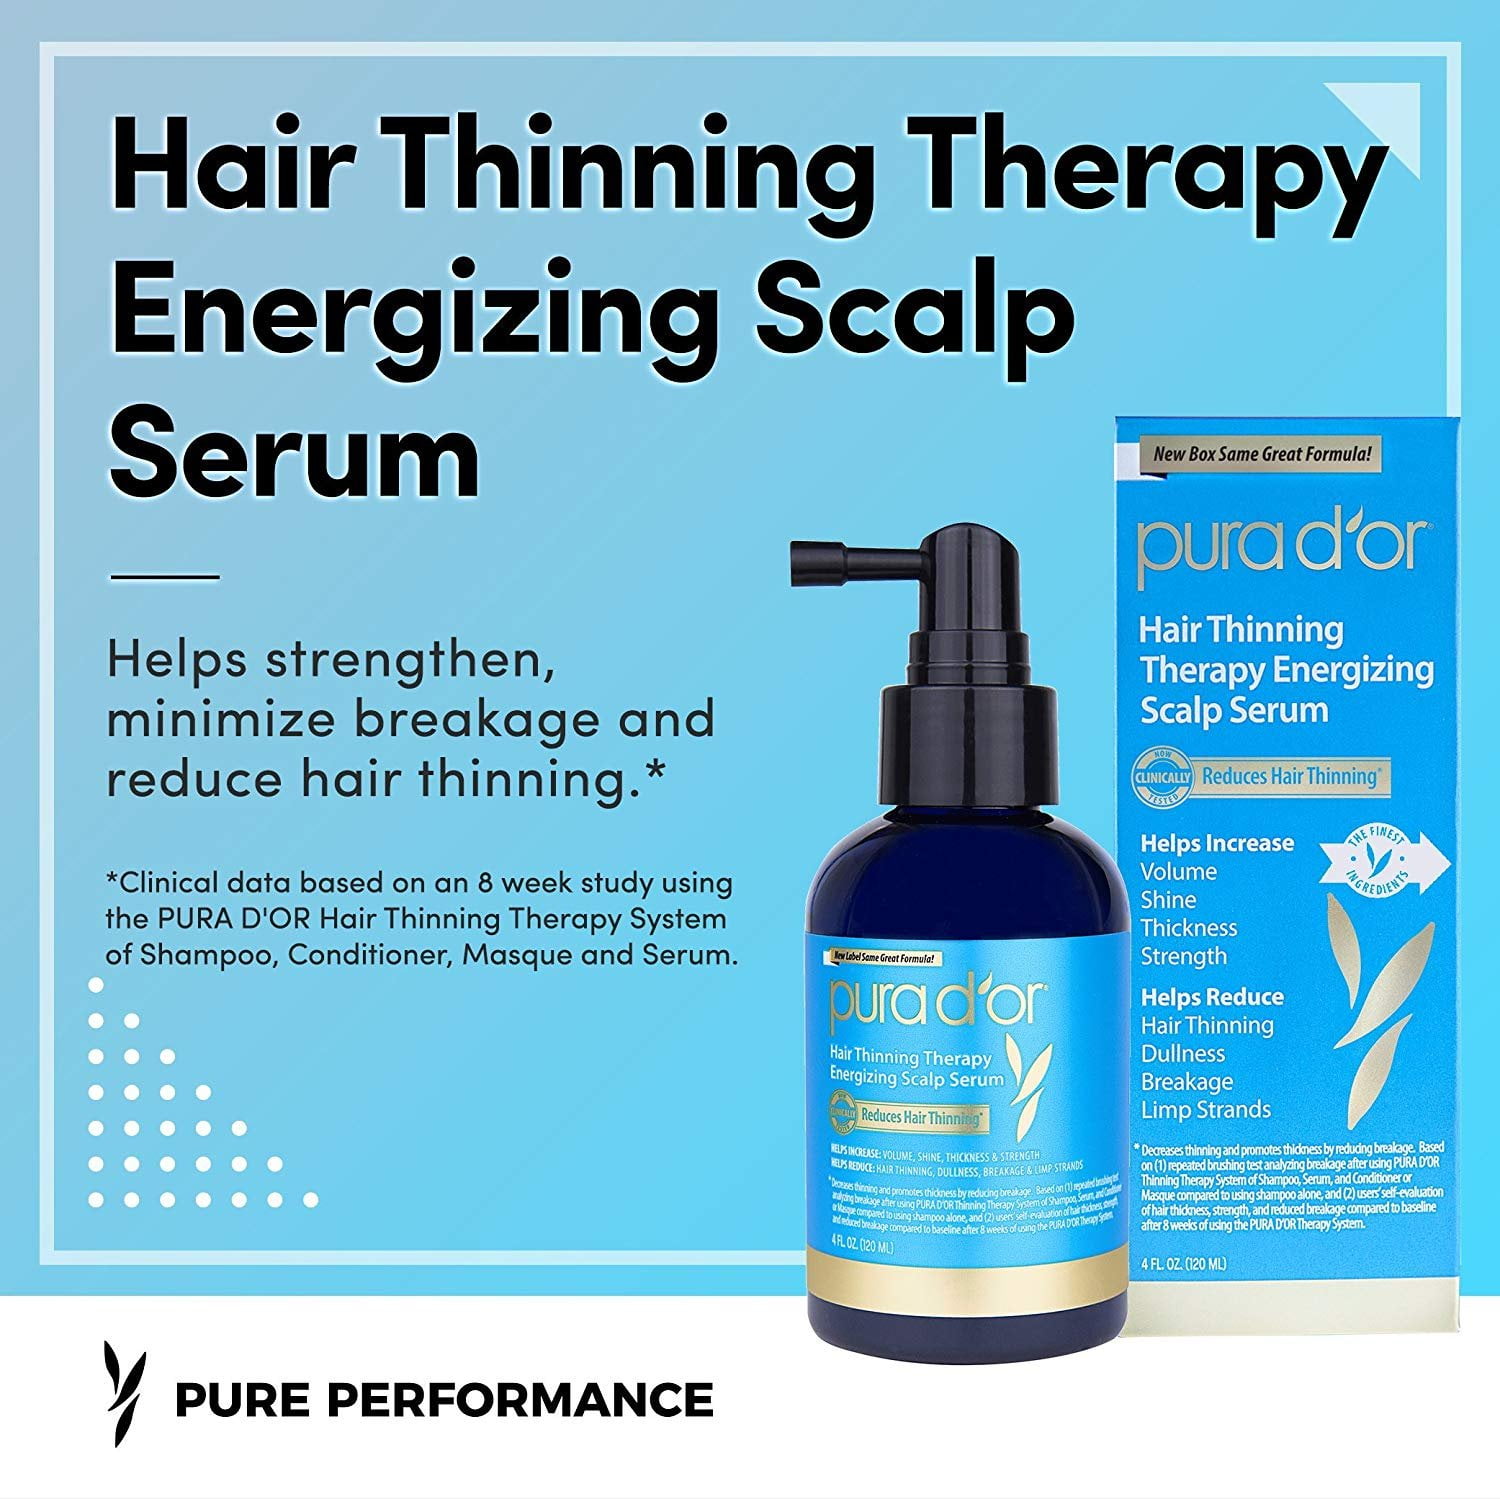 PURA D'OR Hair Thinning Therapy Energizing Scalp Serum Revitalizer (4oz)  with Argan Oil, Biotin, Caffeine, Stem Cell, Catalase & DHT Blockers, All  Hair Types, Men & Women (Packaging may vary) 